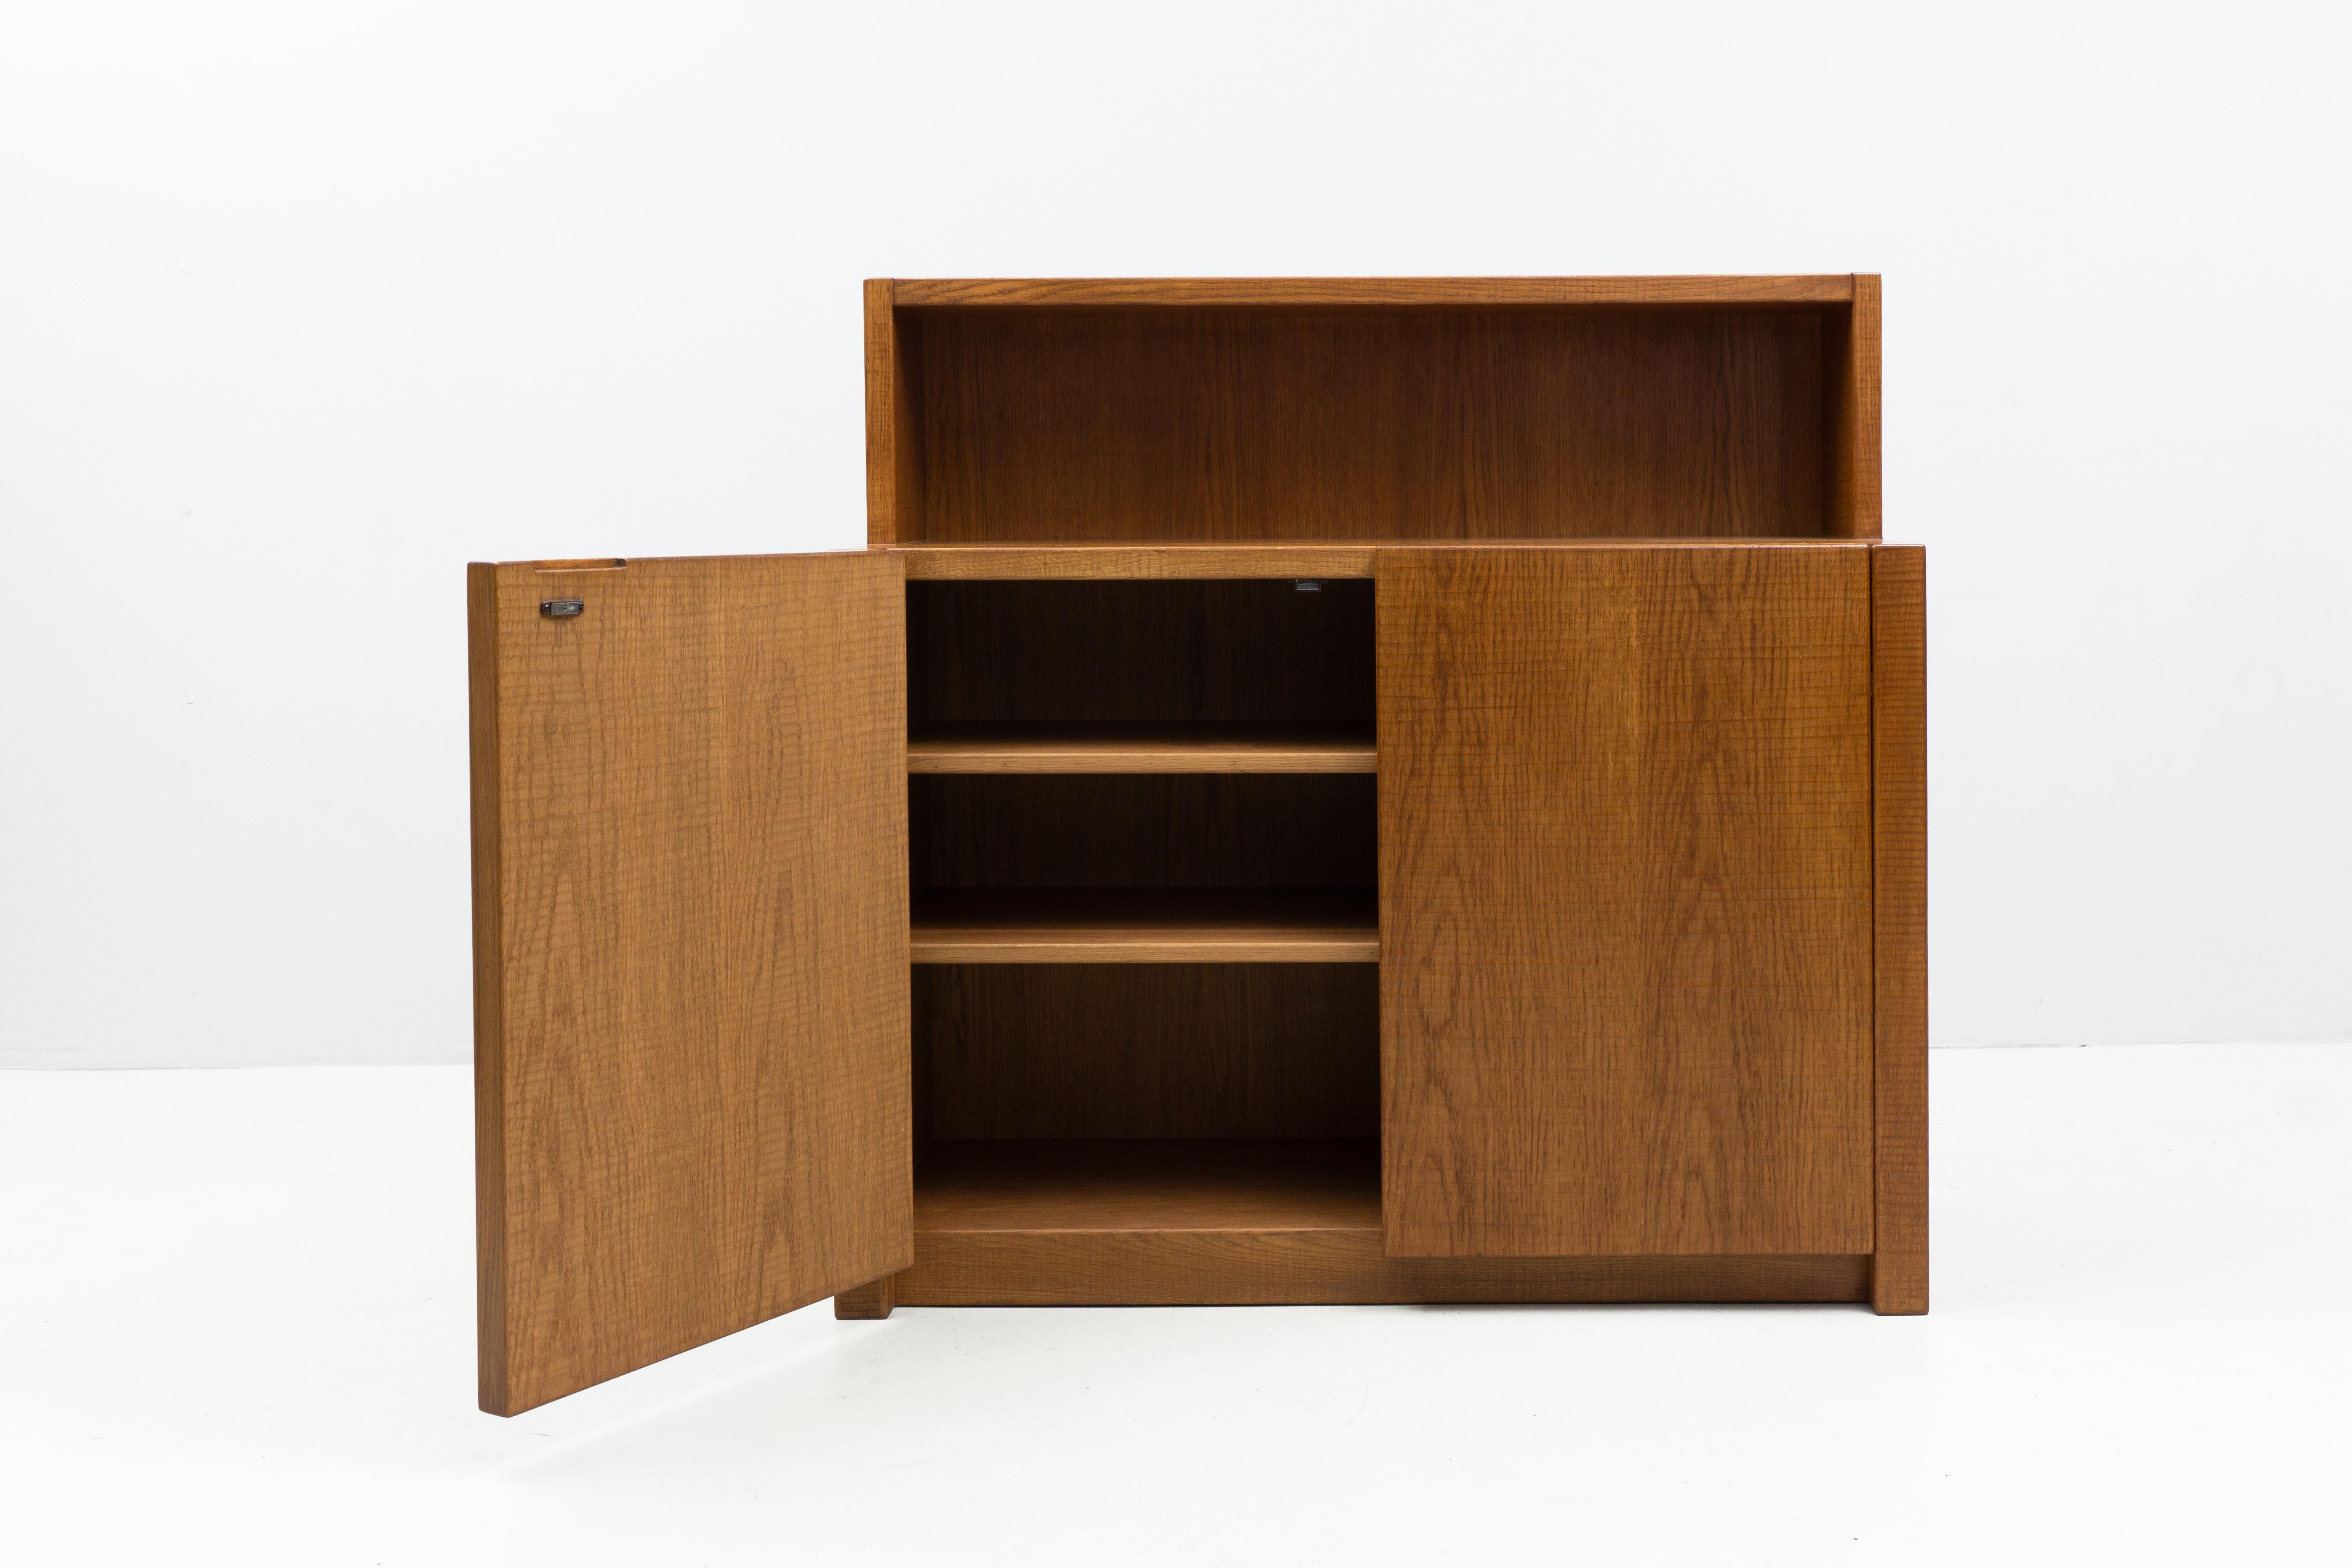 This rare and unique solid oak sideboard was handmade in a small studio in Brescia, Italy around 1975 by the designer and manufacturer Giuseppe Rivadossi. Its design is both minimalistic and intriguing due to its hand chiseled surface.
The